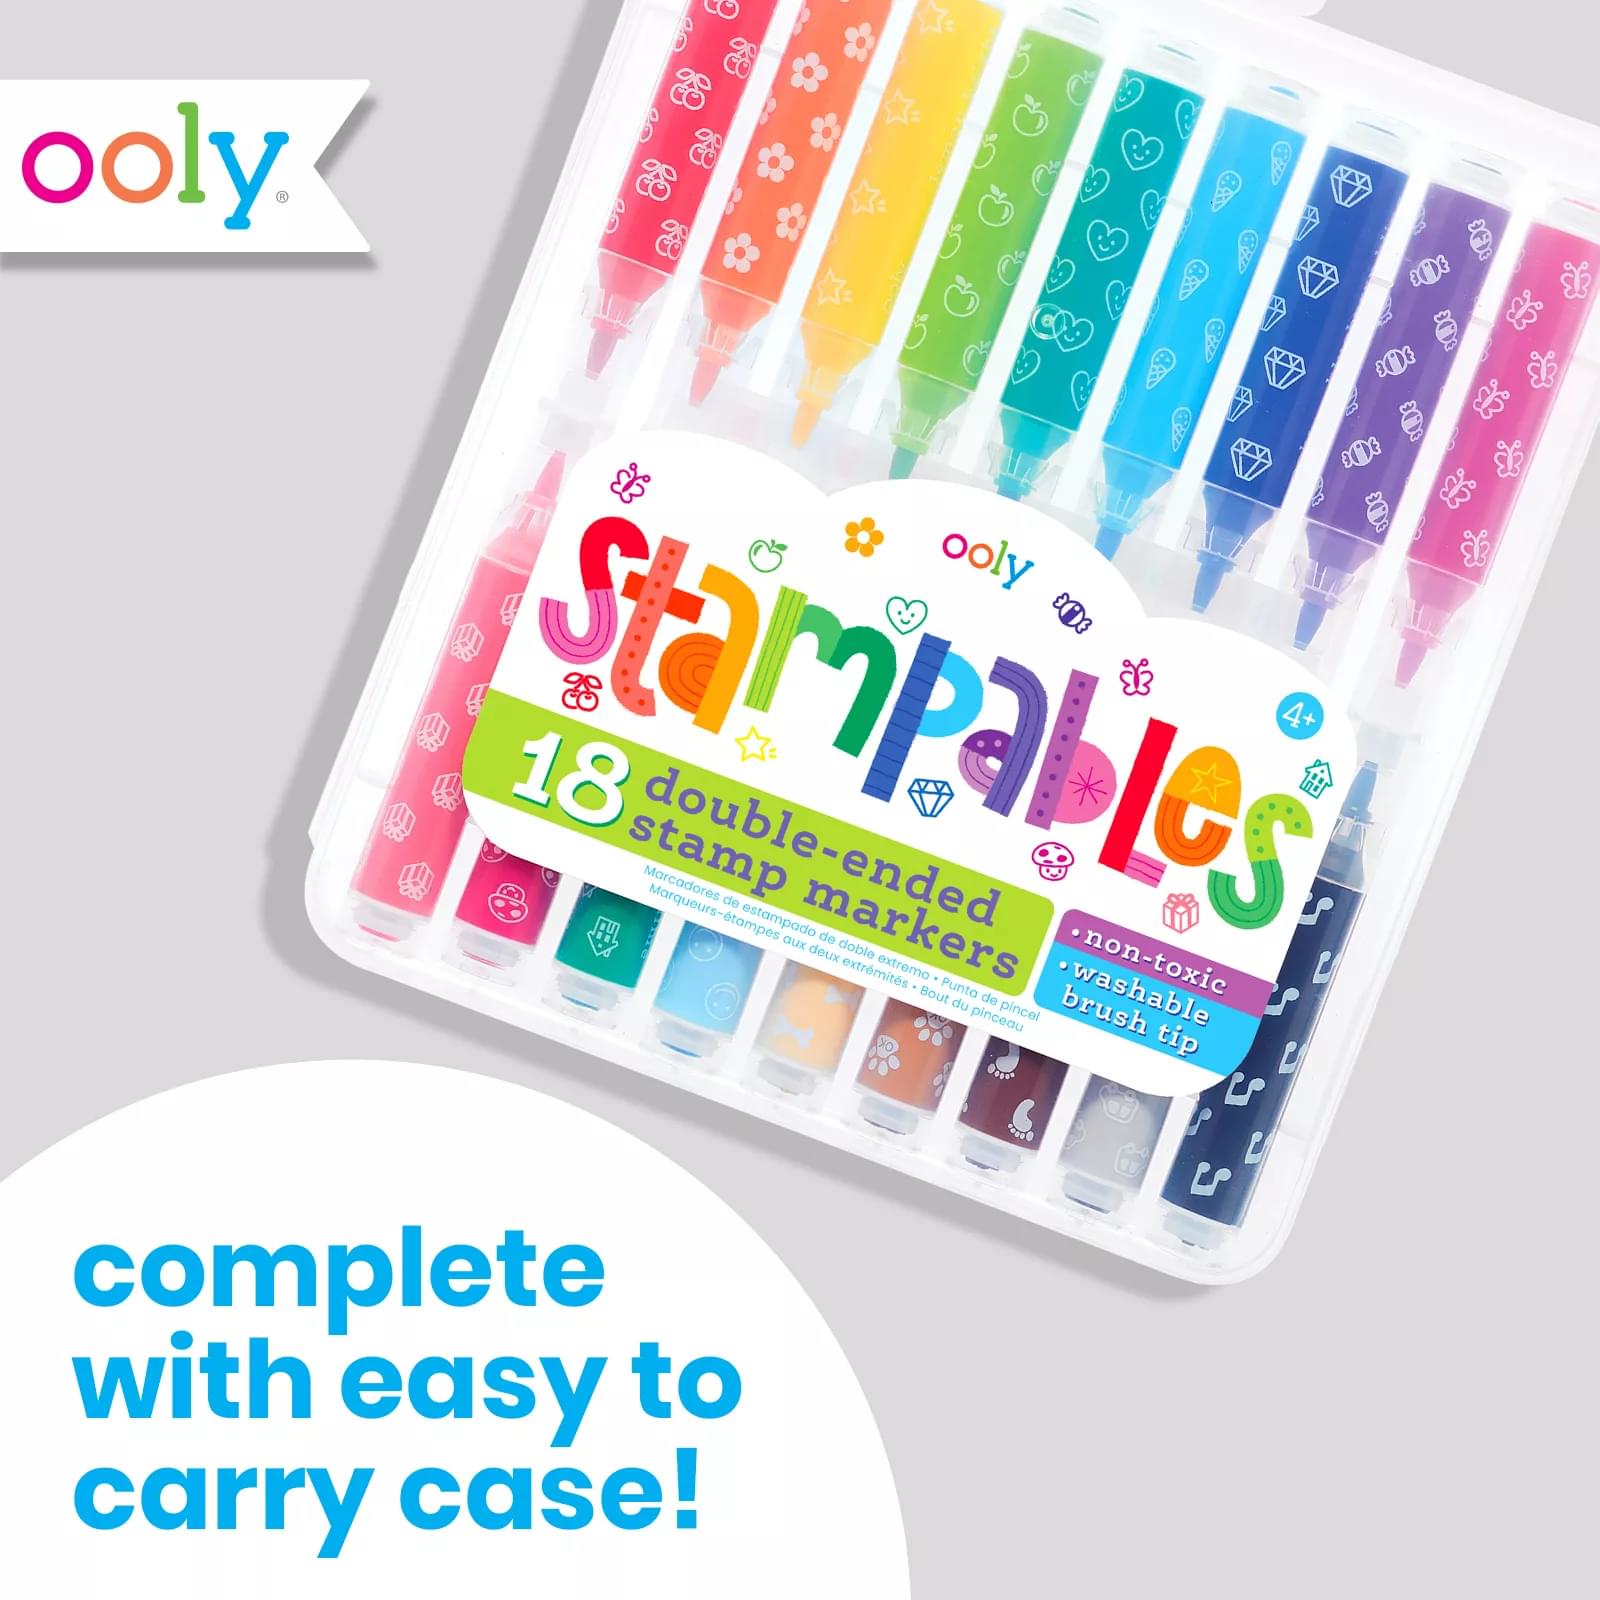 Stamp-A-Doodle double-ended stamp markers (12u)